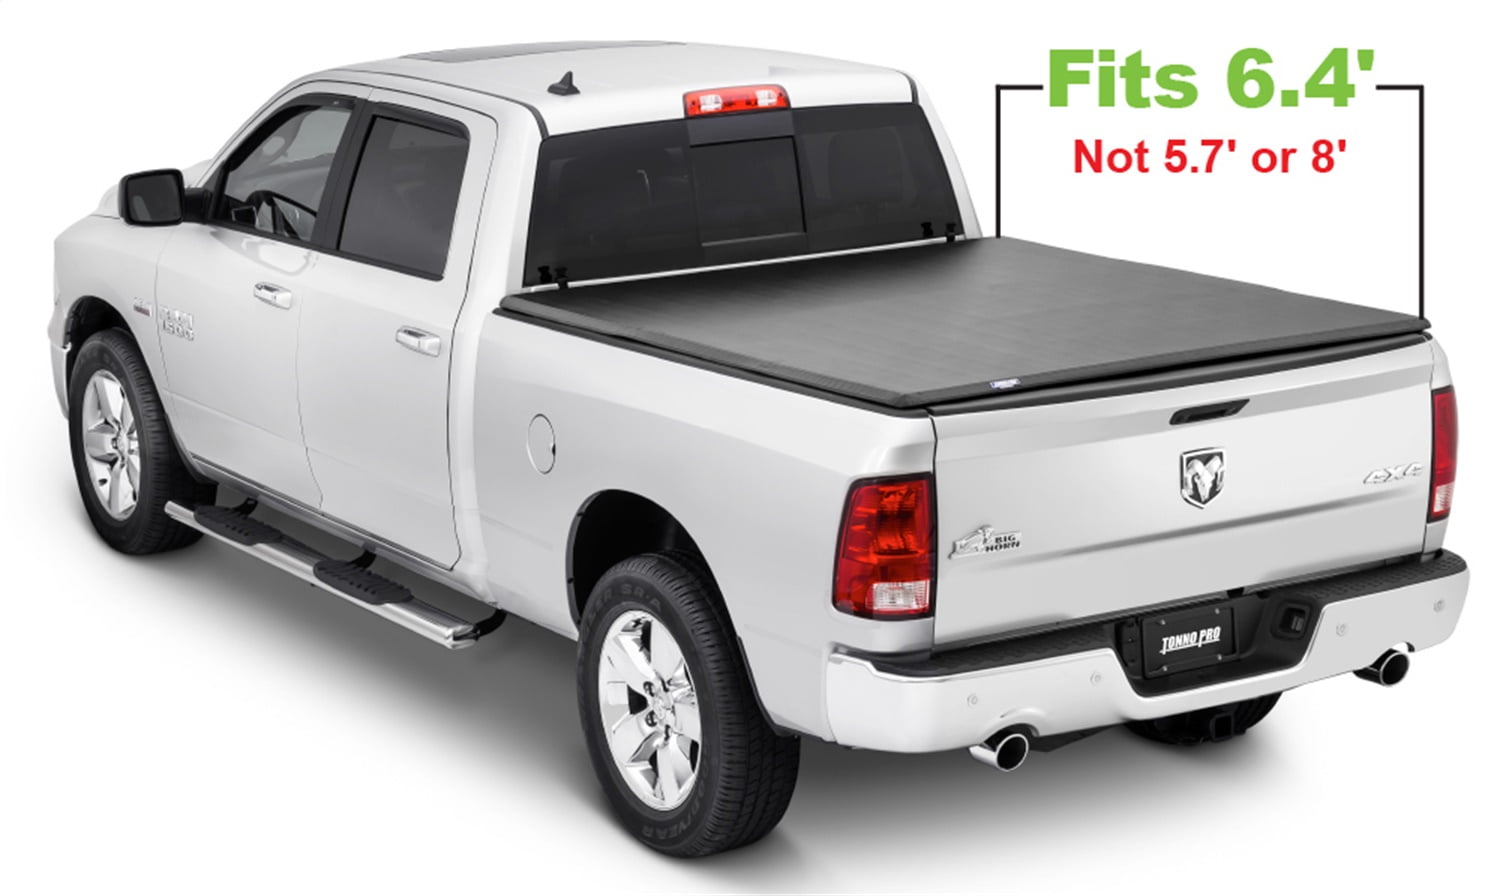 Which Canopy Fits 2016 Ram 1500 64 Bed | Canopy Bed 2016 Ram 1500 Crew Cab Bed Cover